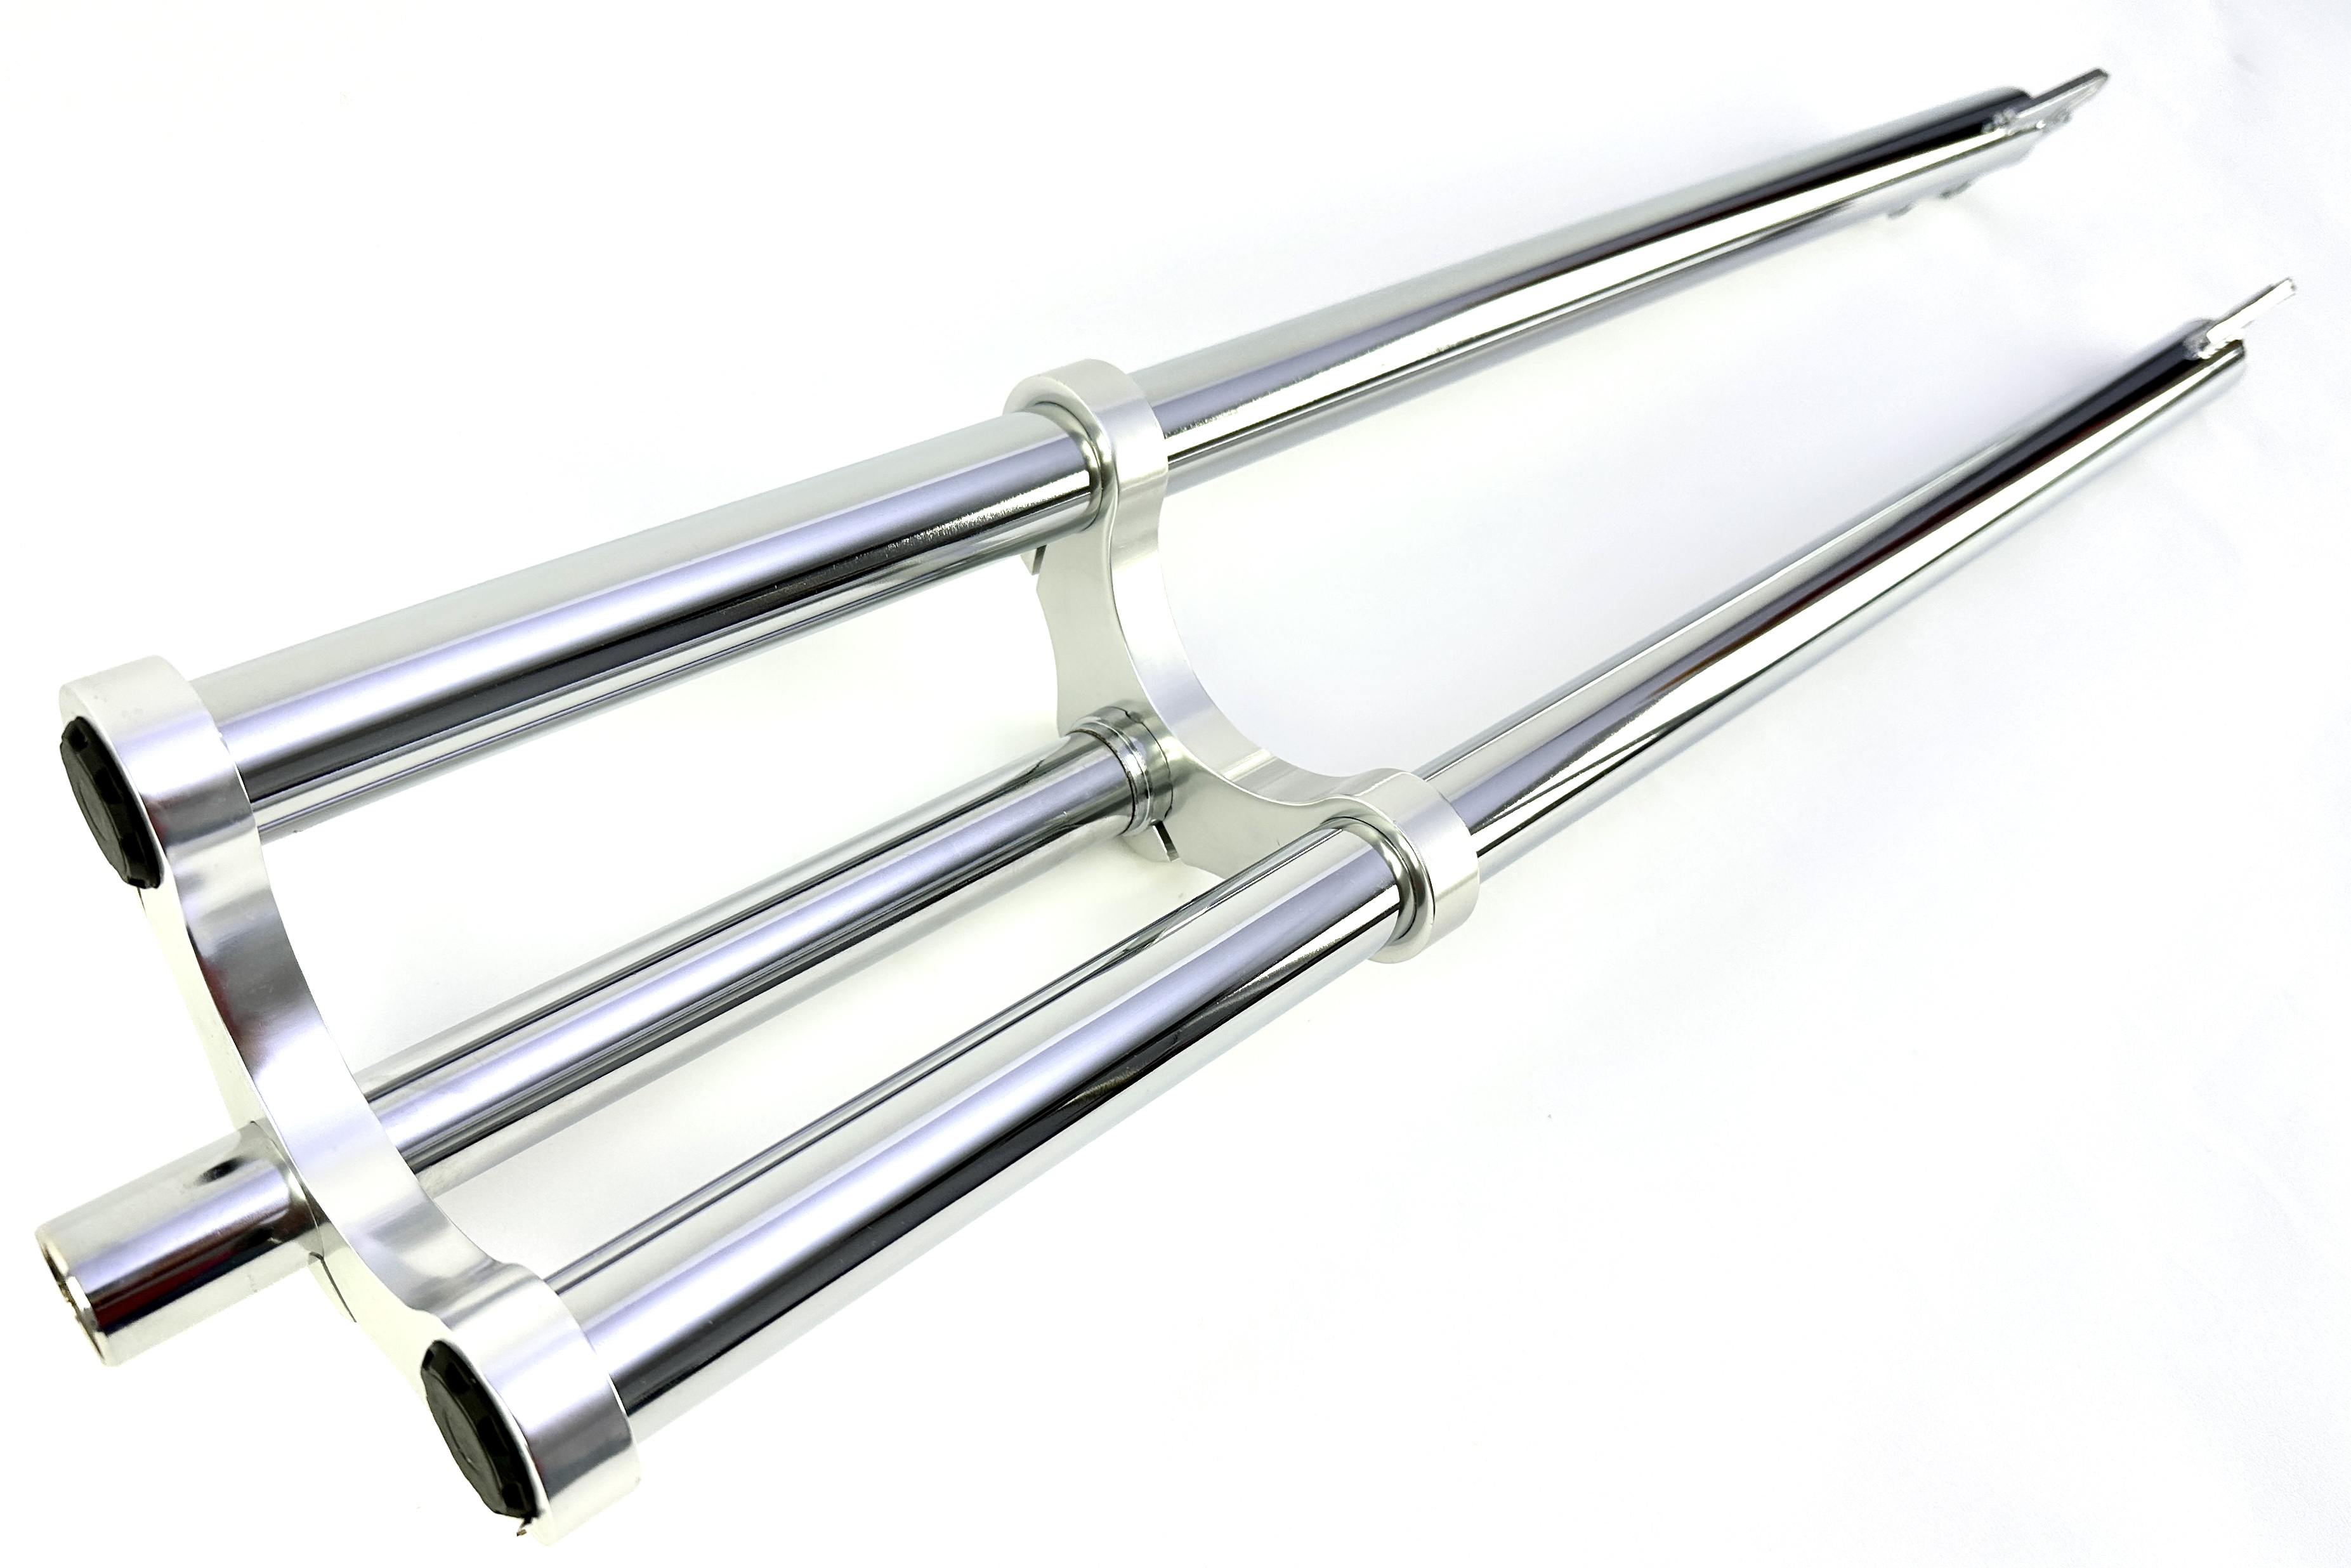 7-Double crown fork 750 mm chrome plated 1 1/8 inch shaft